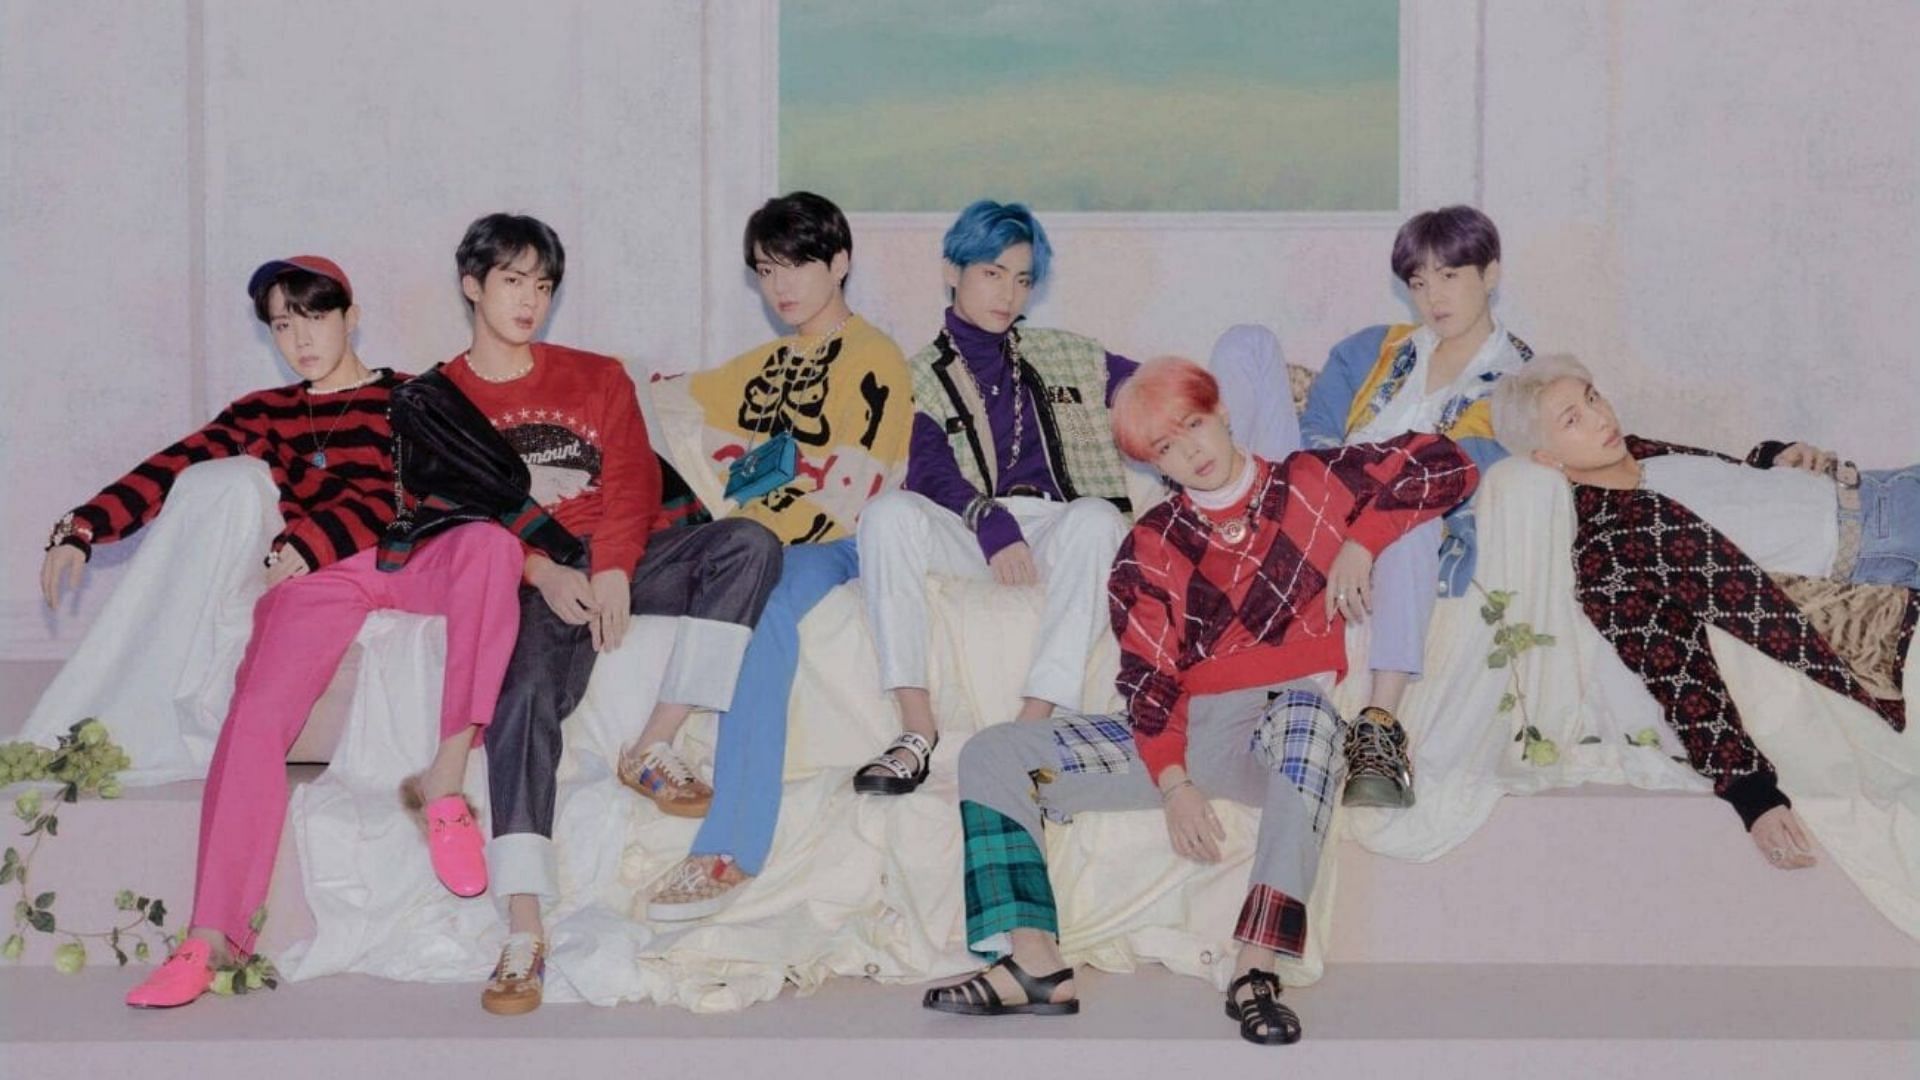 BTS members pose for a concept photo (Image via BIG HIT MUSIC)